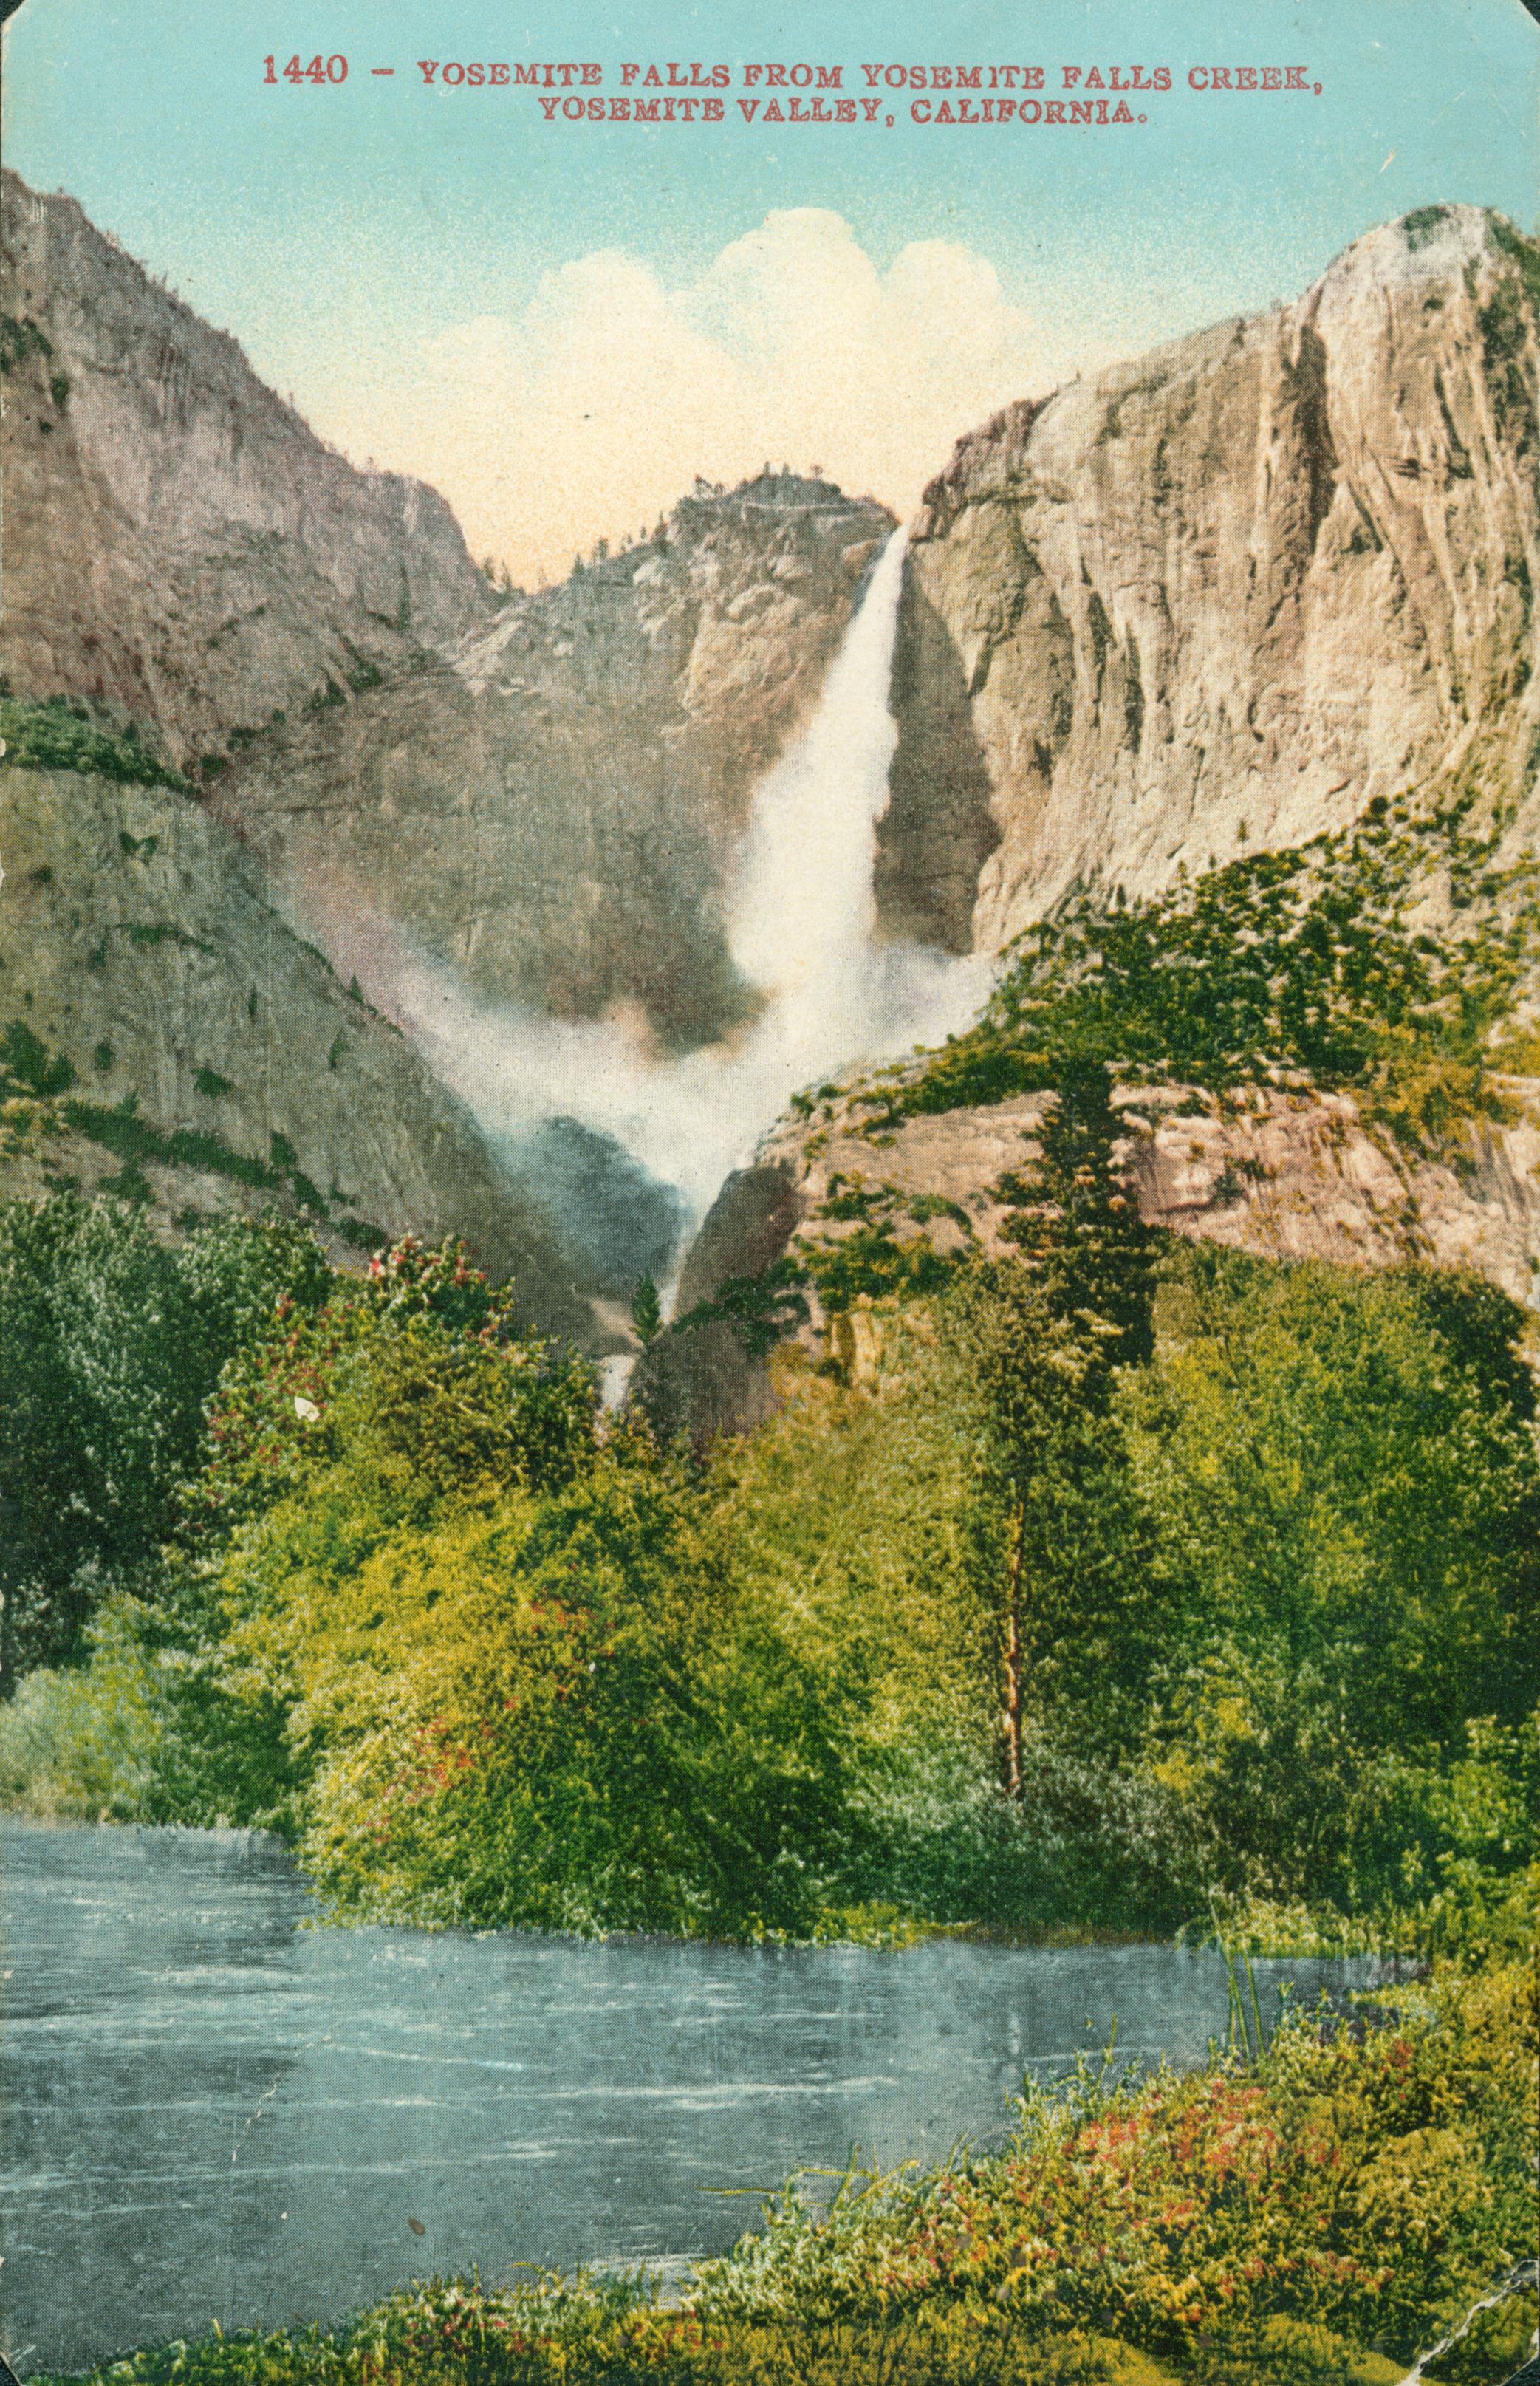 Shows a view of Yosemite Falls with Yosemite Falls Creek in the foreground